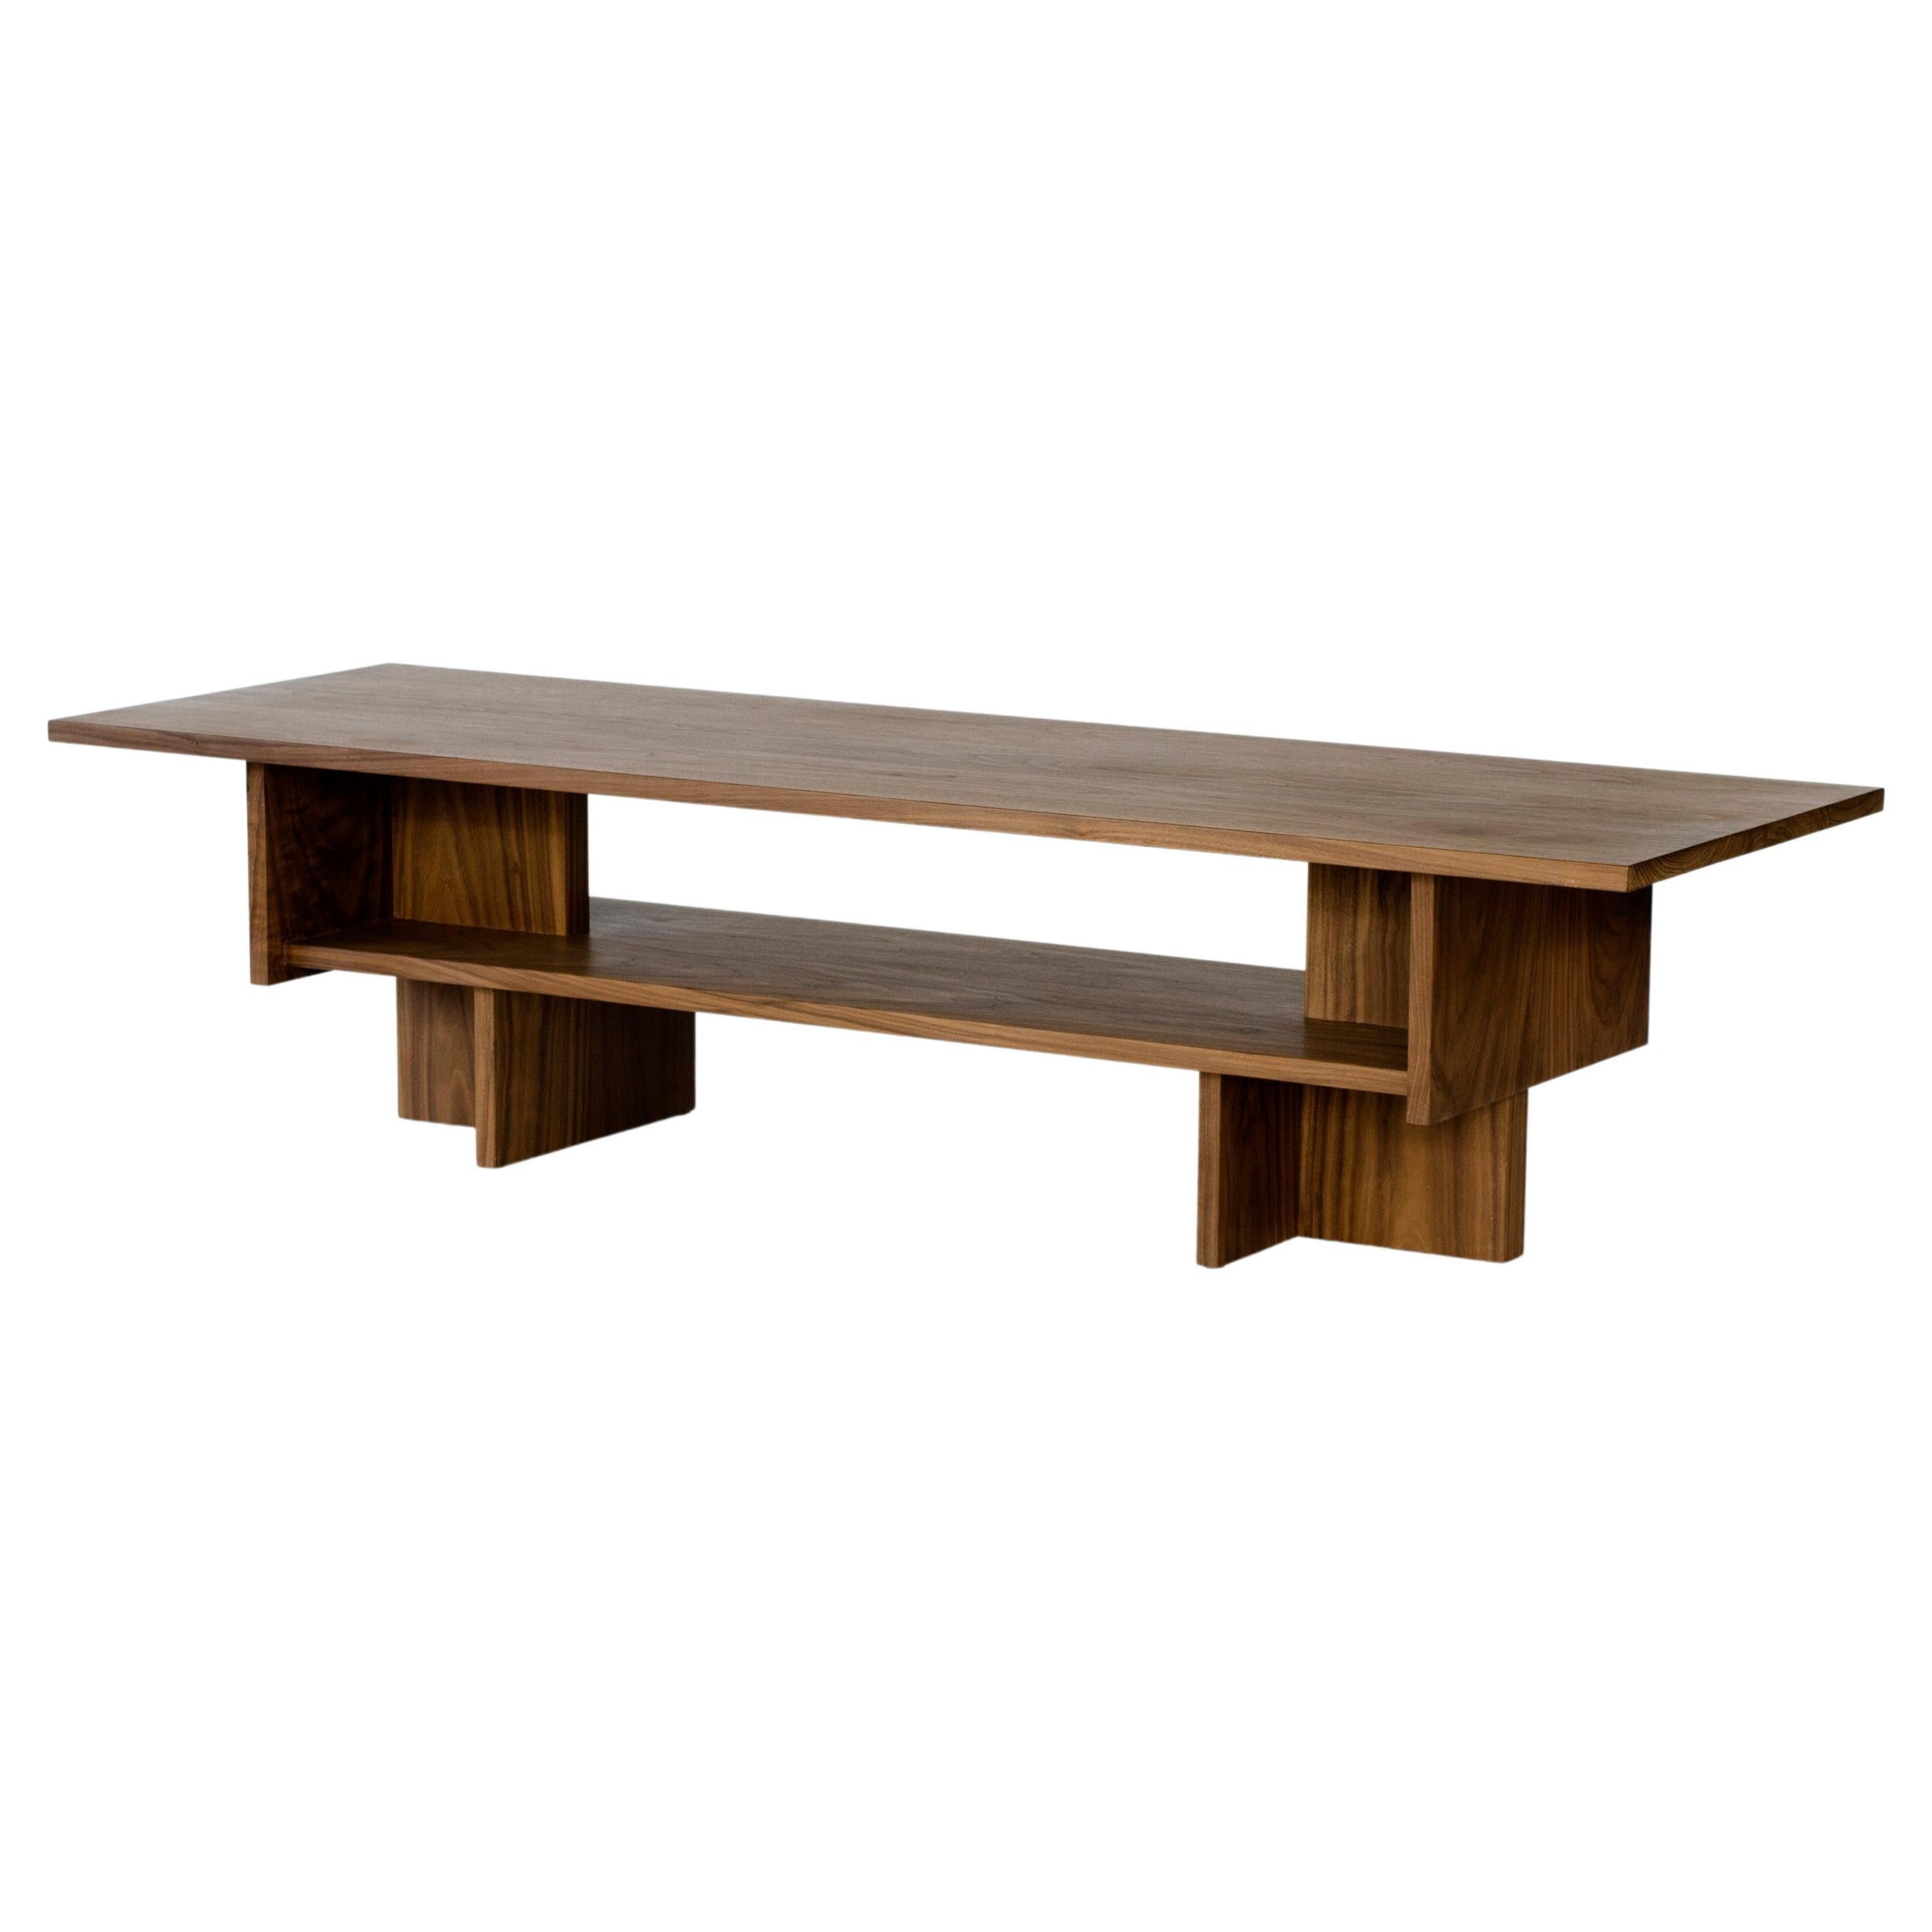 Contemporary Coffee Table "Ballast" in Walnut by Casey Lurie